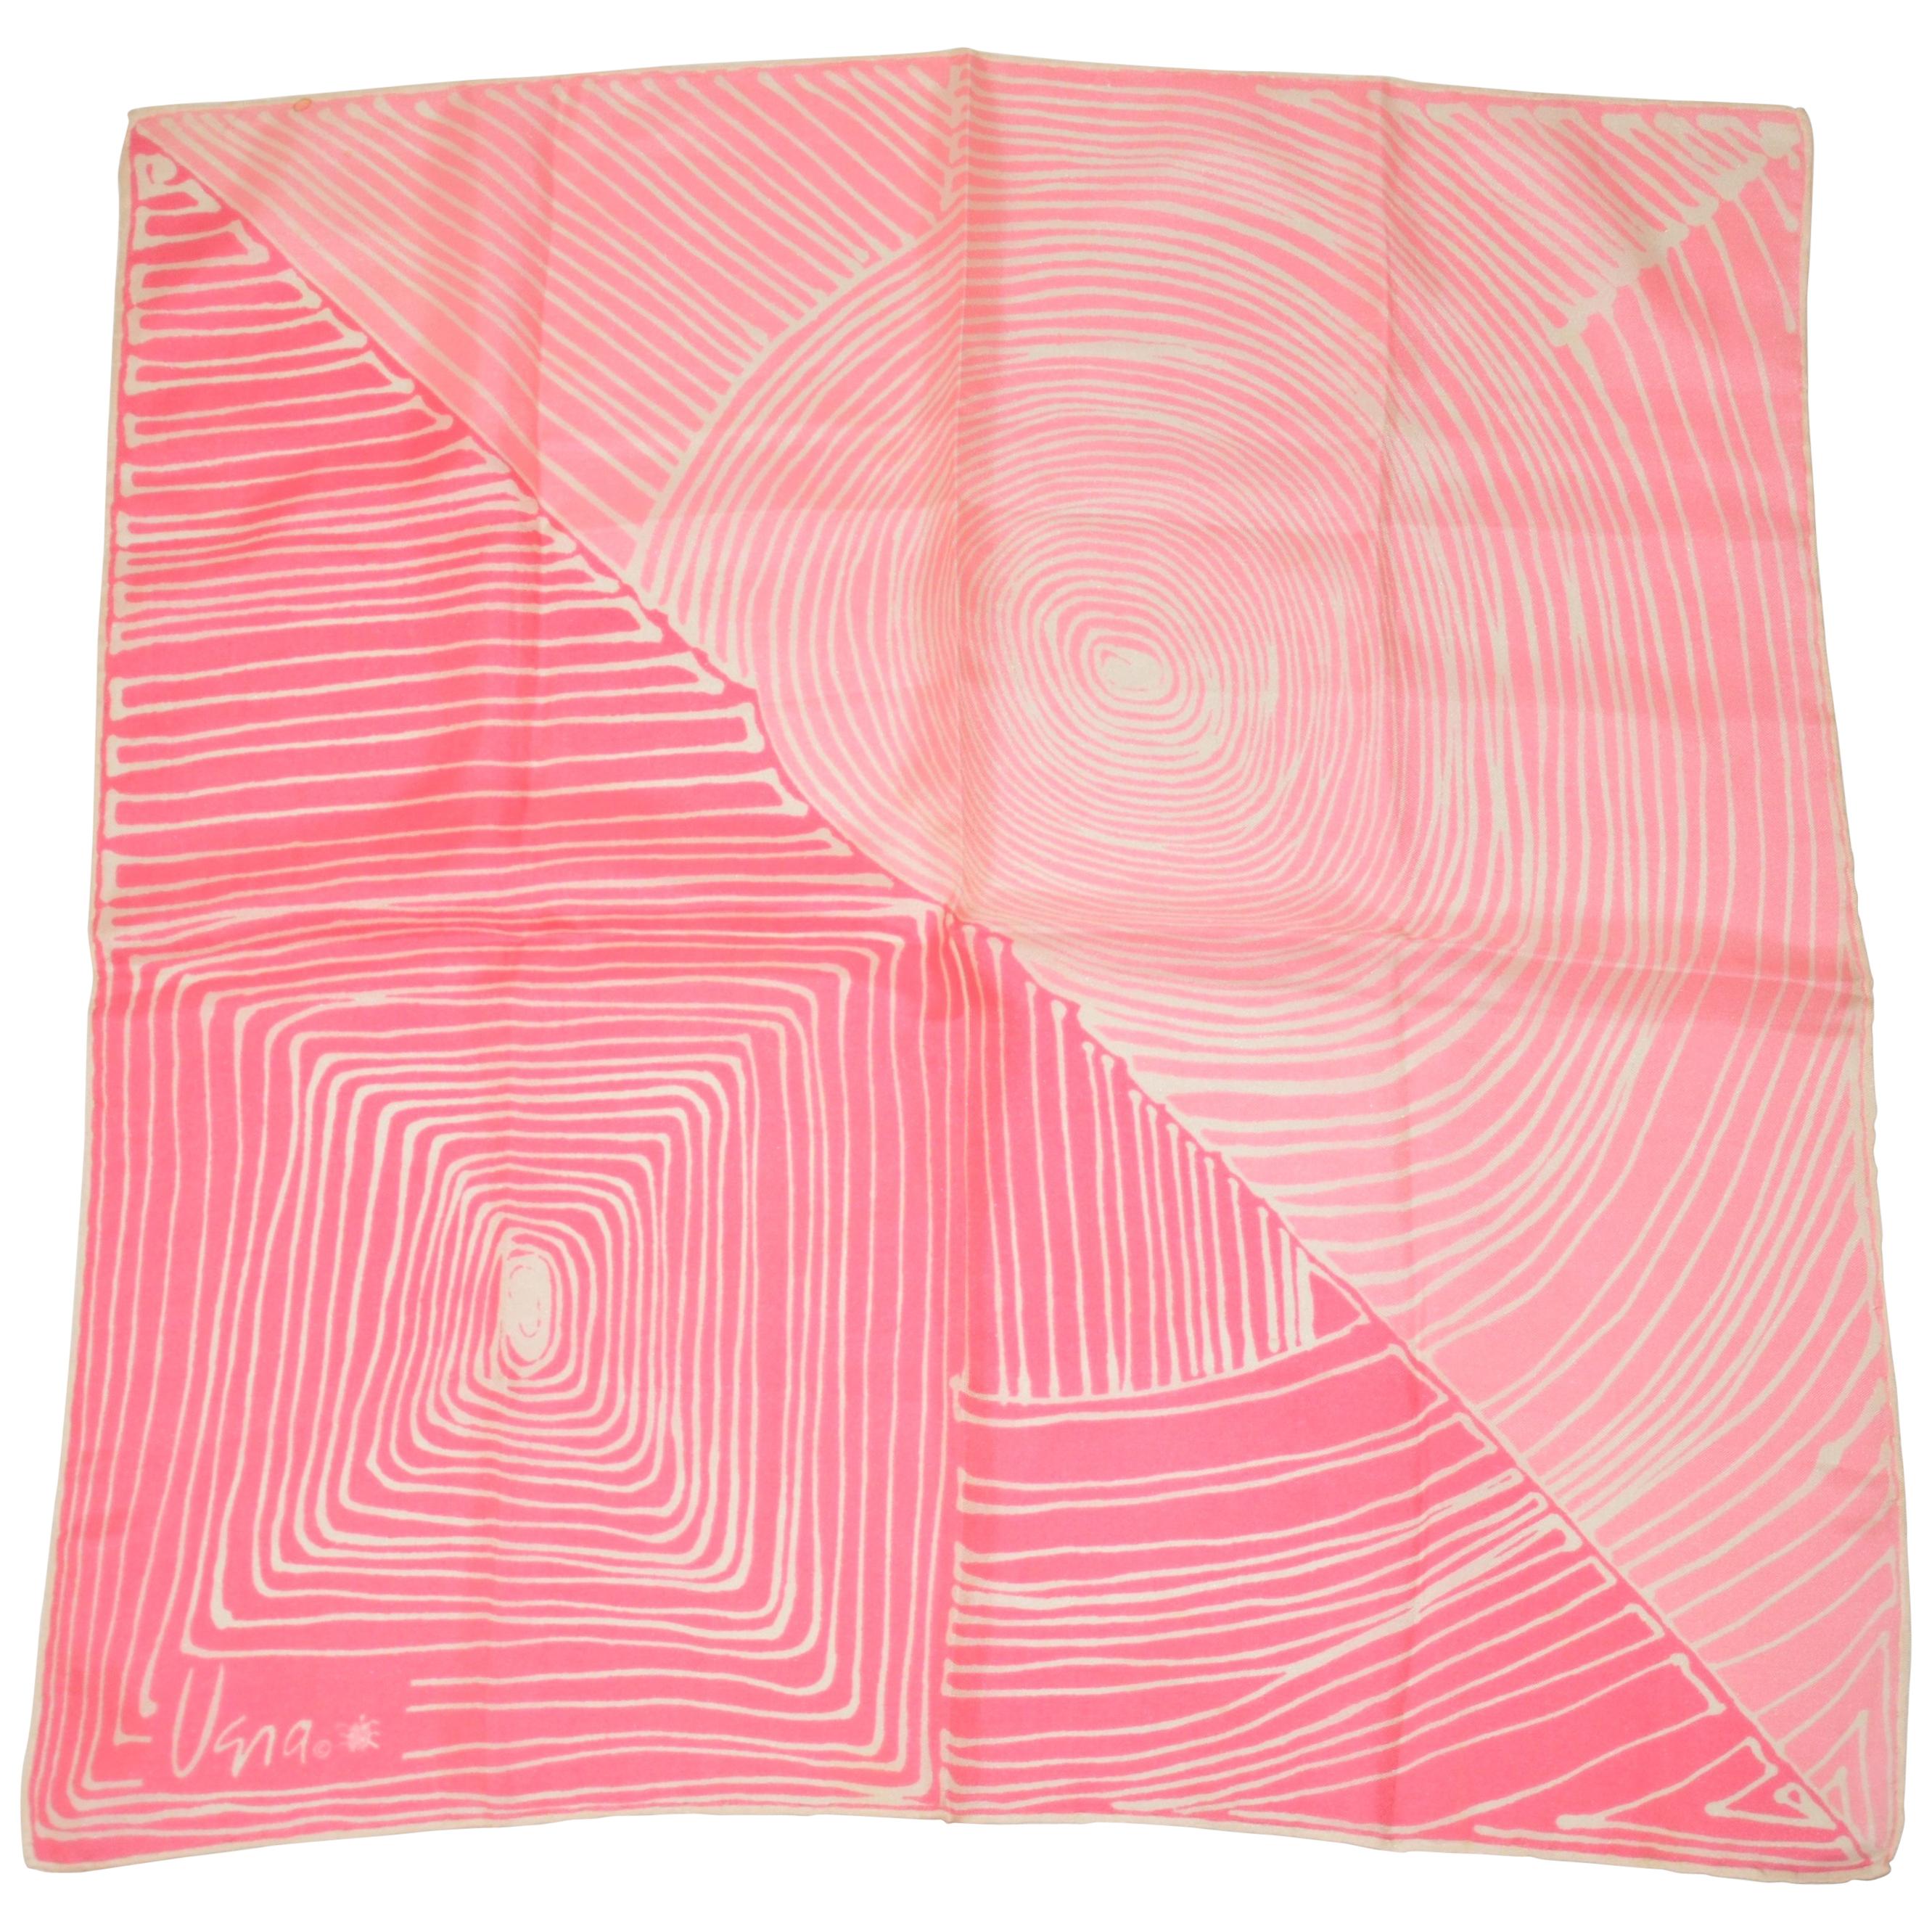 Vera Ivory & Pink "Sun & Sunset" Silk Scarf with Hand-Rolled Edges